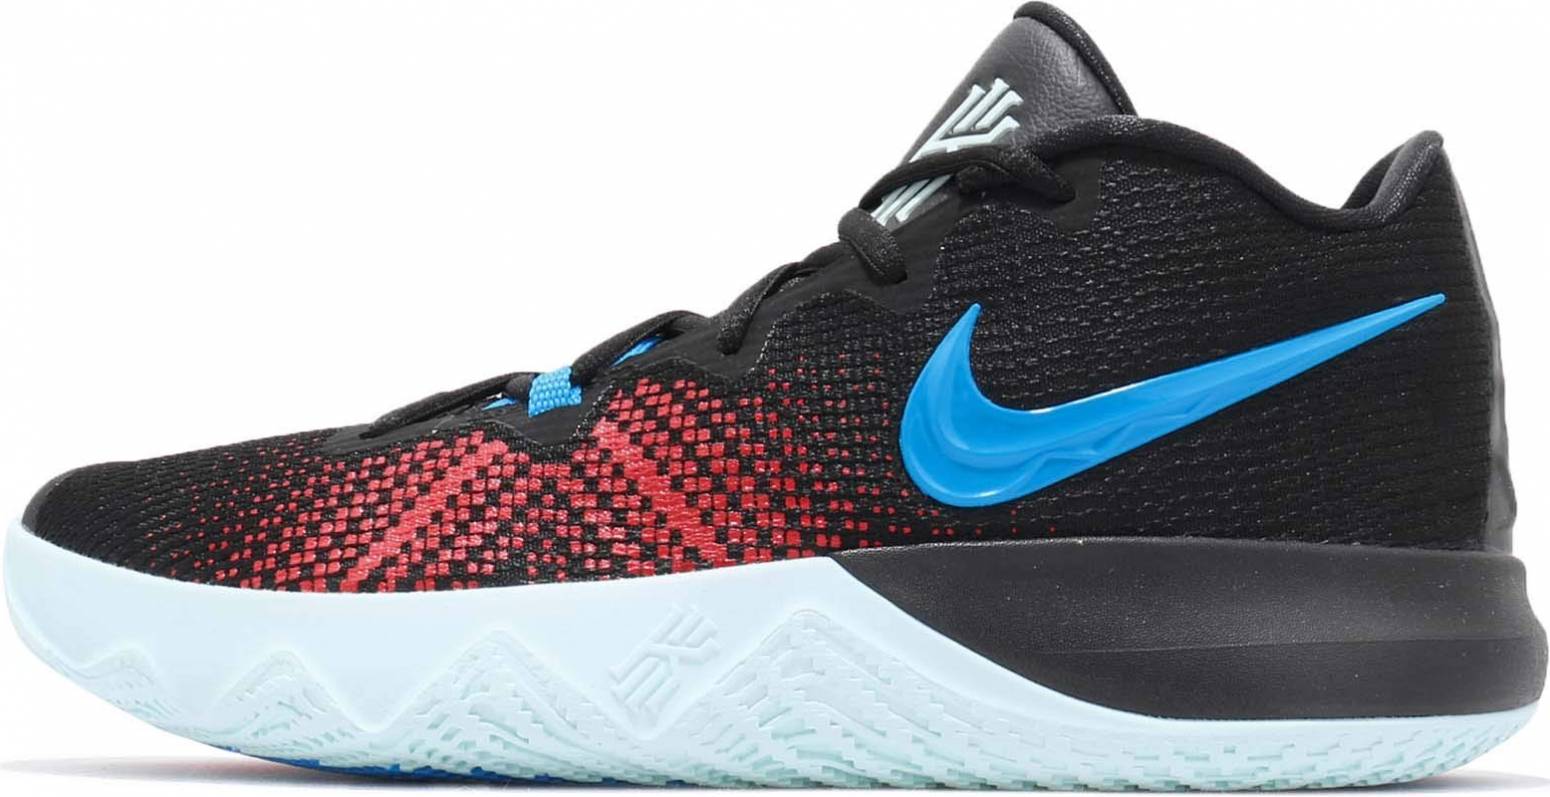 kyrie 4 flytrap red